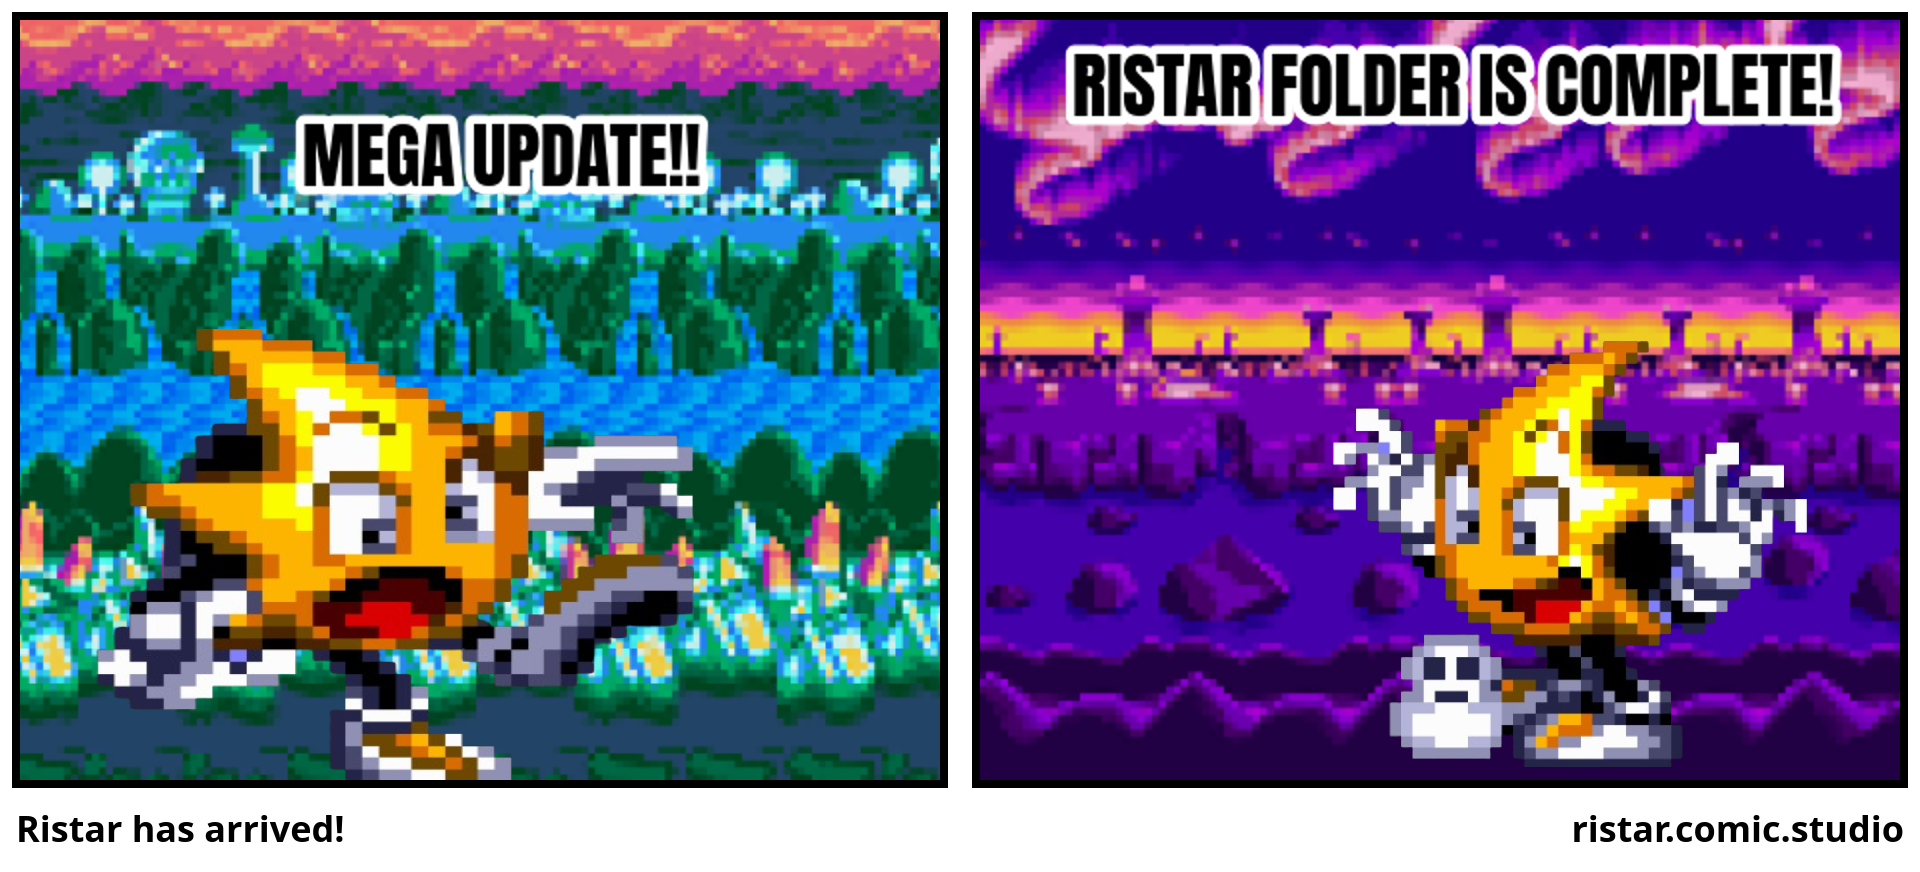 Ristar has arrived!